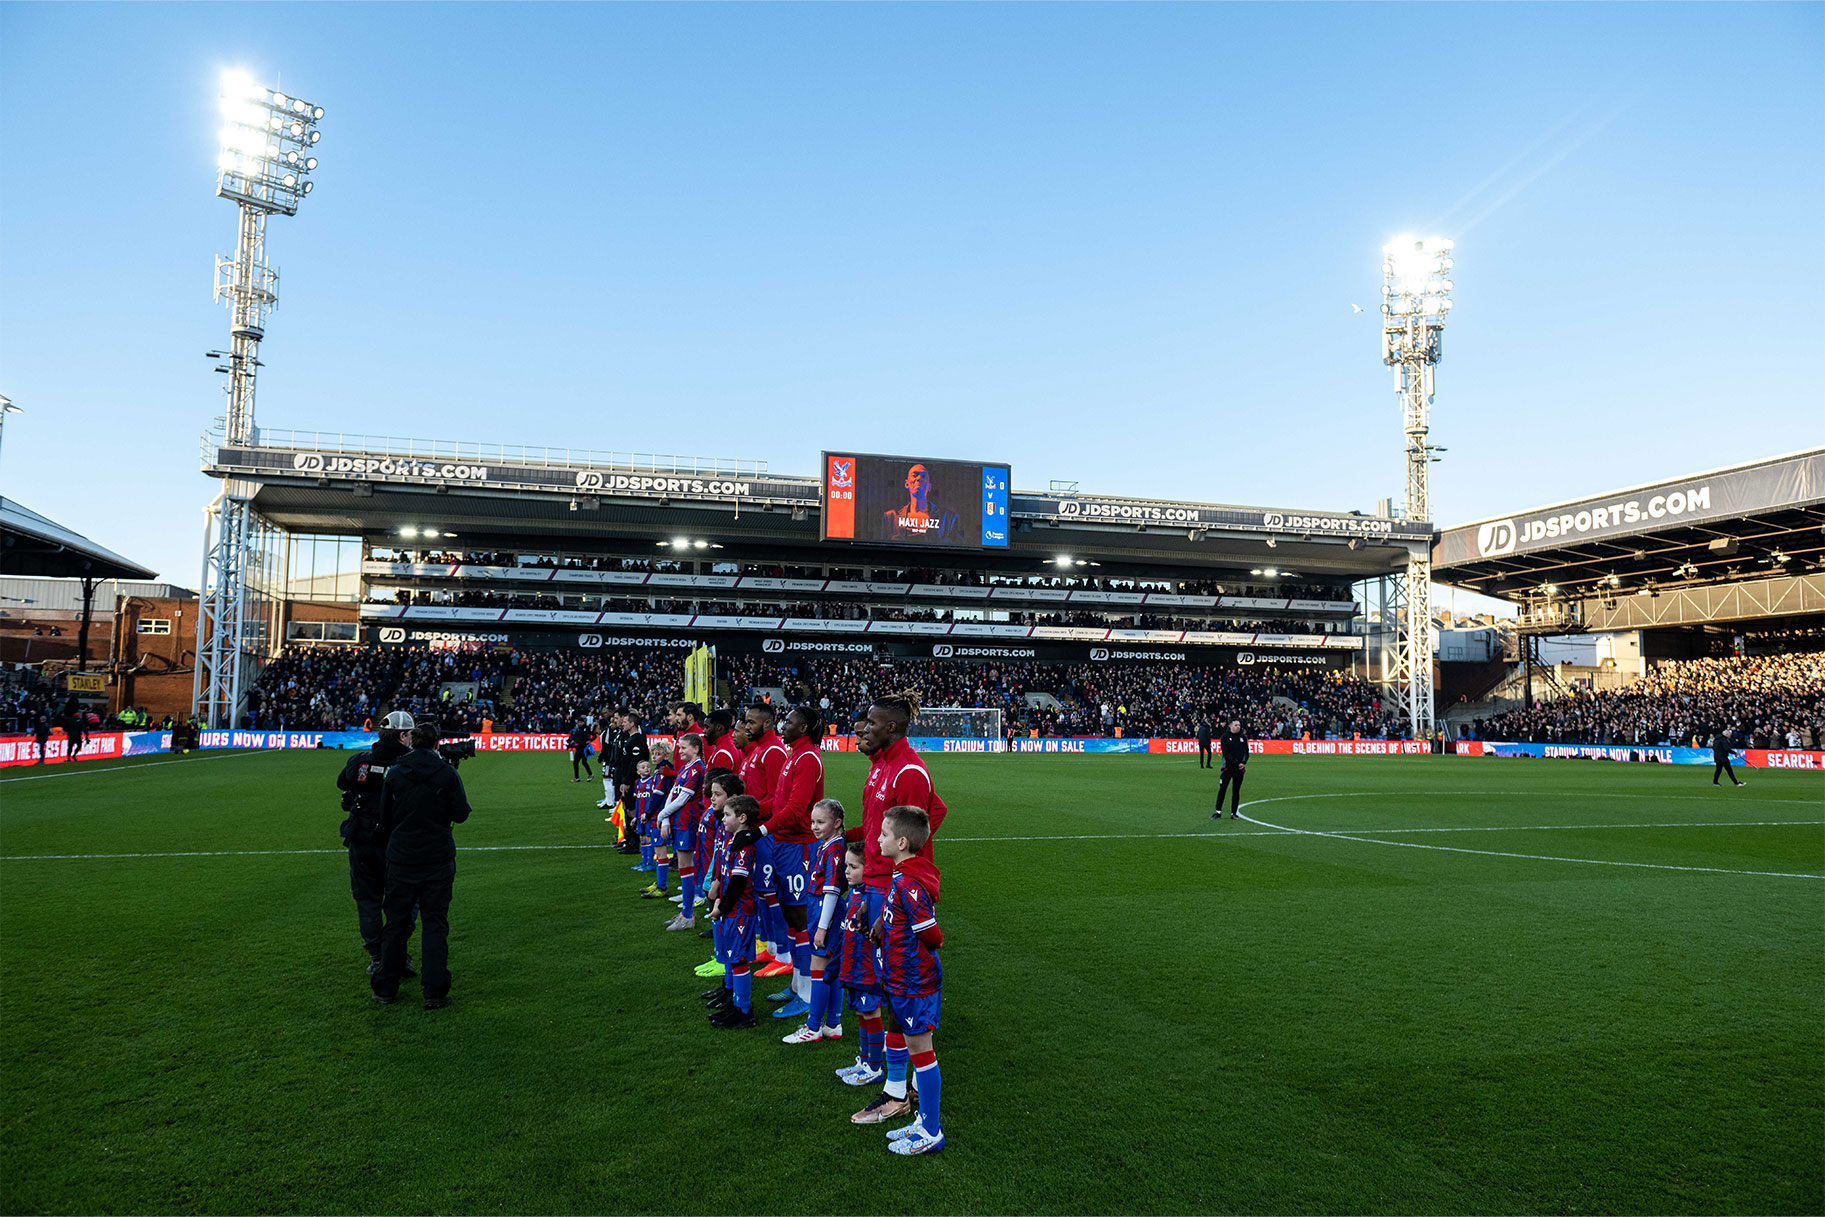 A general view of the stadium during the Premier League match between Crystal Palace and Fulham FC at Selhurst Park